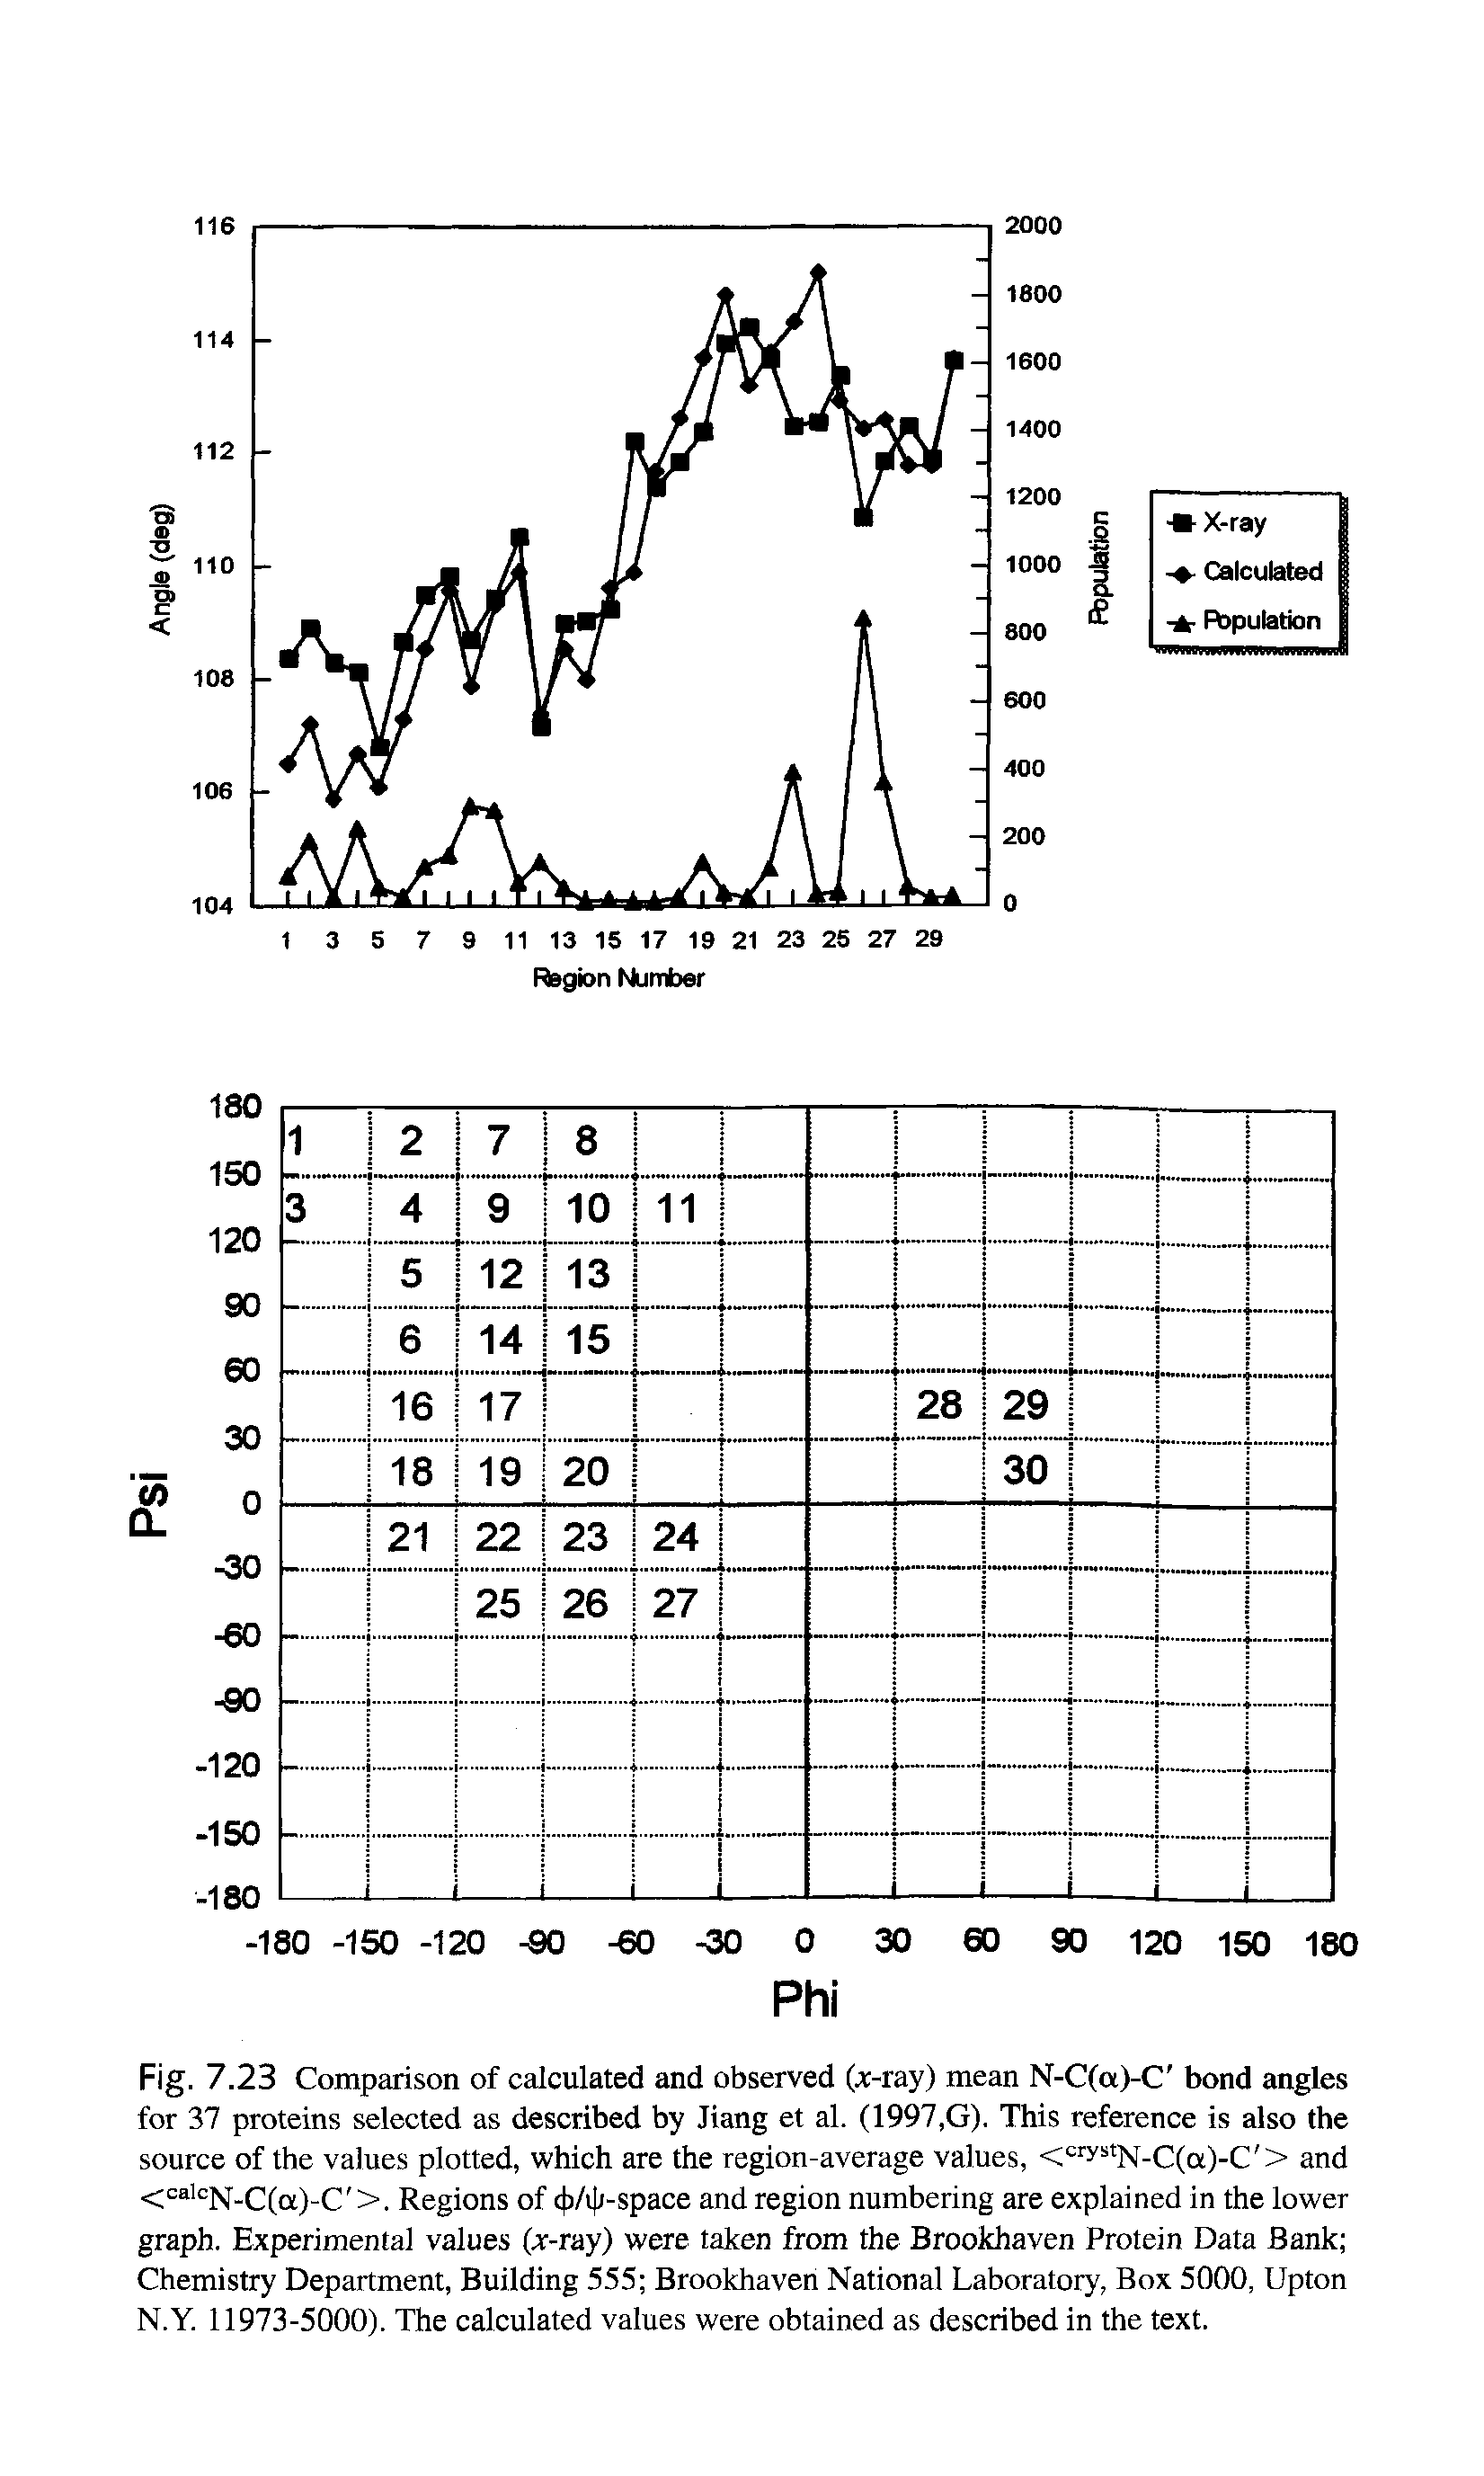 Fig. 7.23 Comparison of calculated and observed (x-ray ) mean N-C(a)-C bond angles for 37 proteins selected as described by Jiang et al. (1997,G). This reference is also the source of the values plotted, which are the region-average values, <crystN-C(ct)-C > and <calcN-C(ot)-C >. Regions of cb/ri-space and region numbering are explained in the lower graph. Experimental values (x-ray) were taken from the Brookhaven Protein Data Bank Chemistry Department, Building 555 Brookhaven National Laboratory, Box 5000, Upton N.Y. 11973-5000). The calculated values were obtained as described in the text.